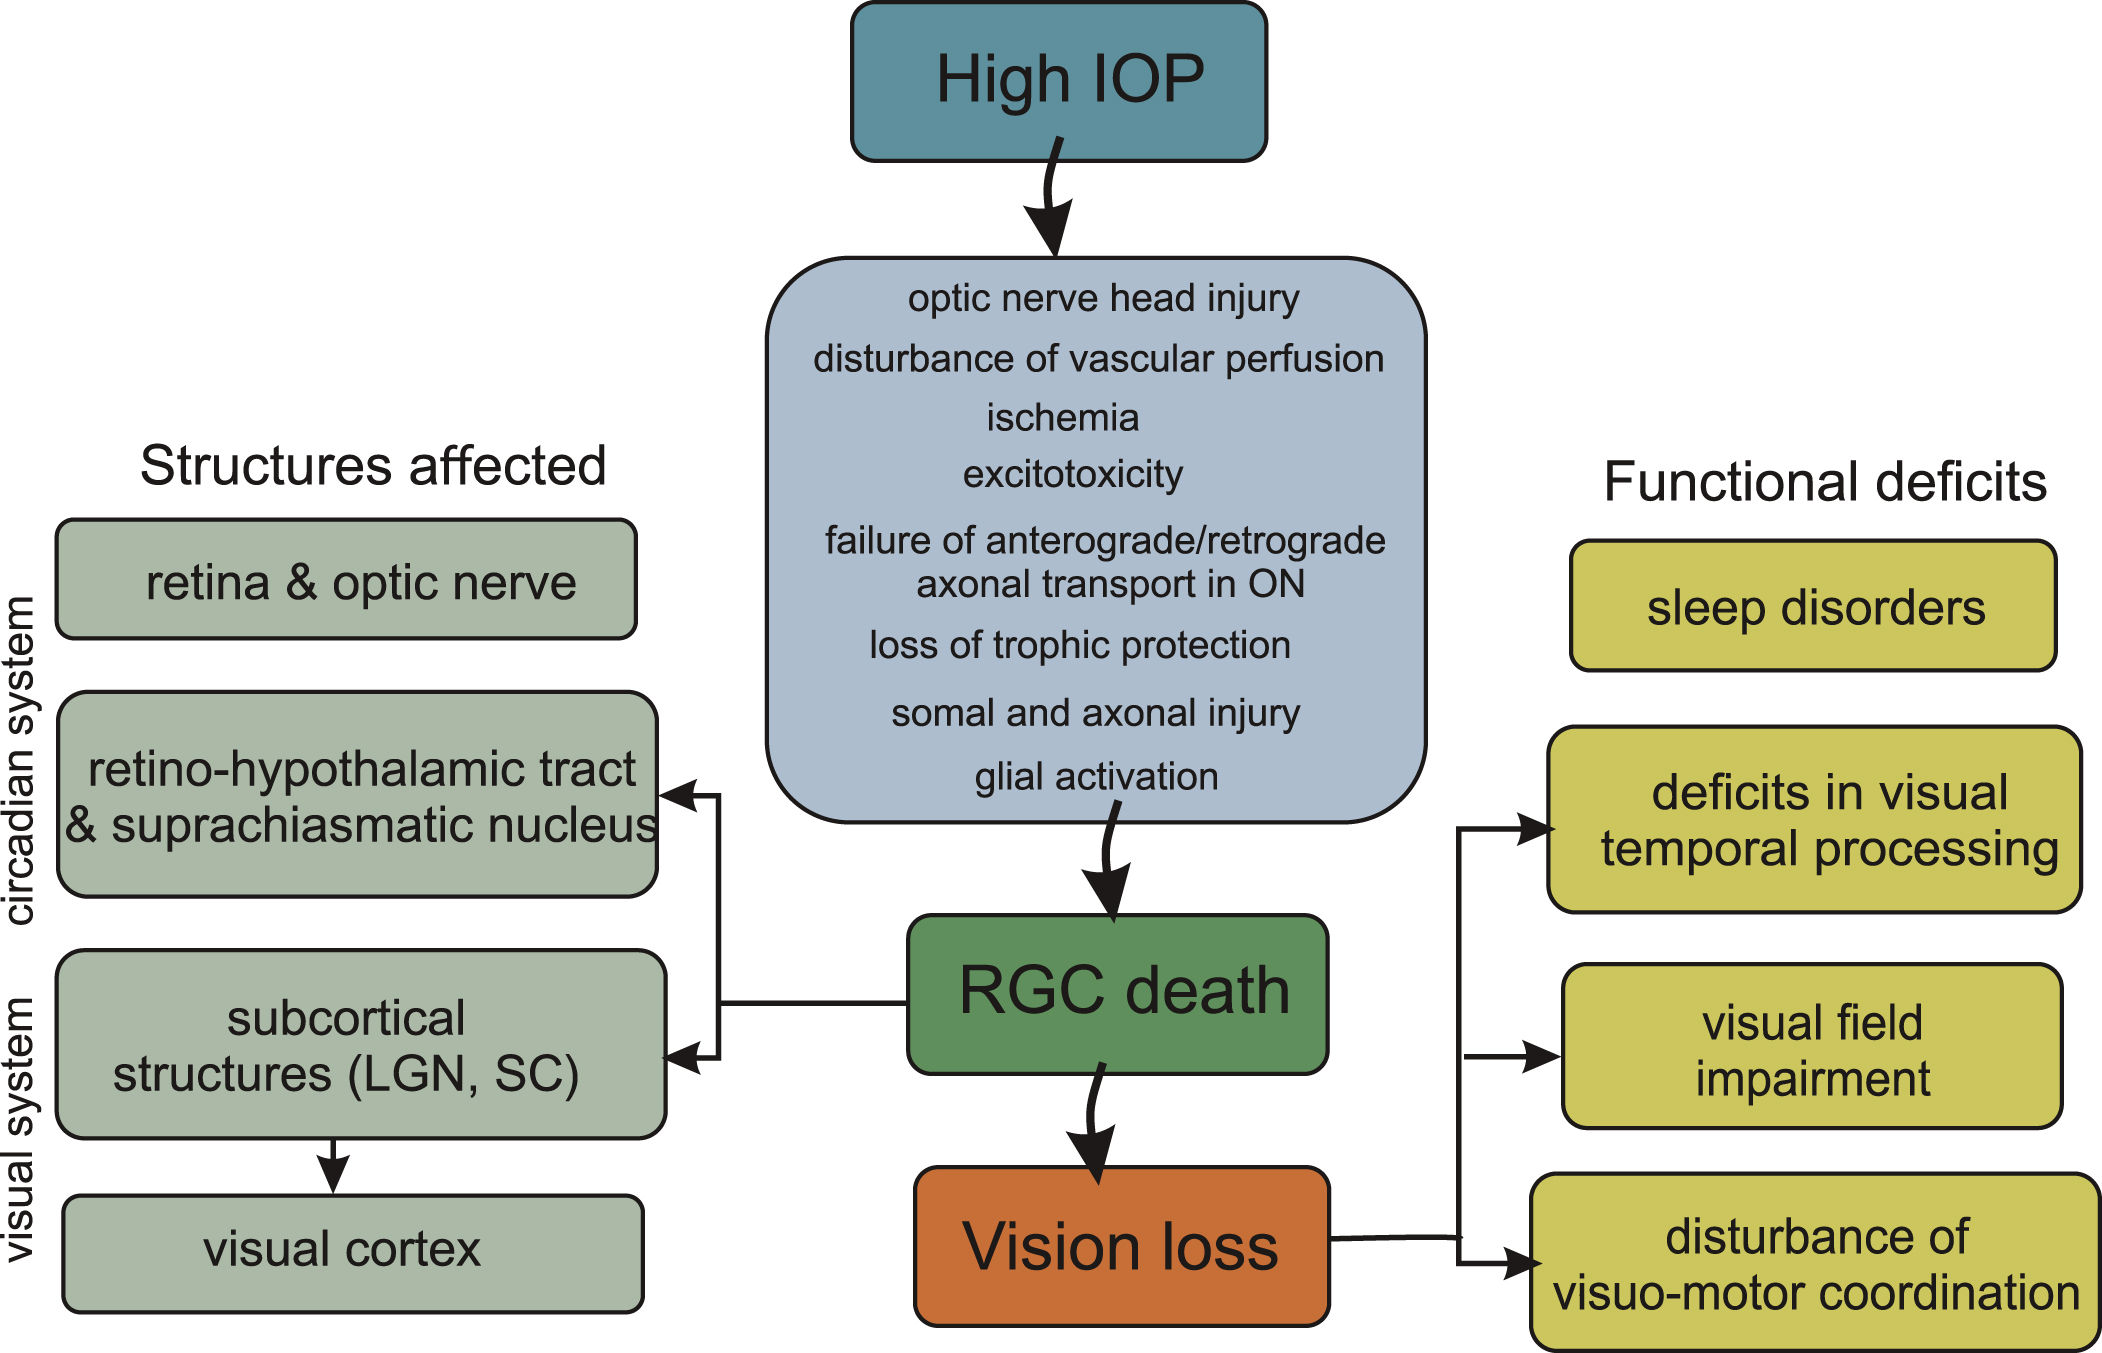 Flow diagram showing key factors involved in the pathogenesis of glaucoma triggered by elevated intraocular pressure and its structural and functional consequences. IOP – intraocular pressure; LGN – lateral geniculate nucleus; ON – optic nerve; RGC – retinal ganglion cell; SC – superior colliculus.